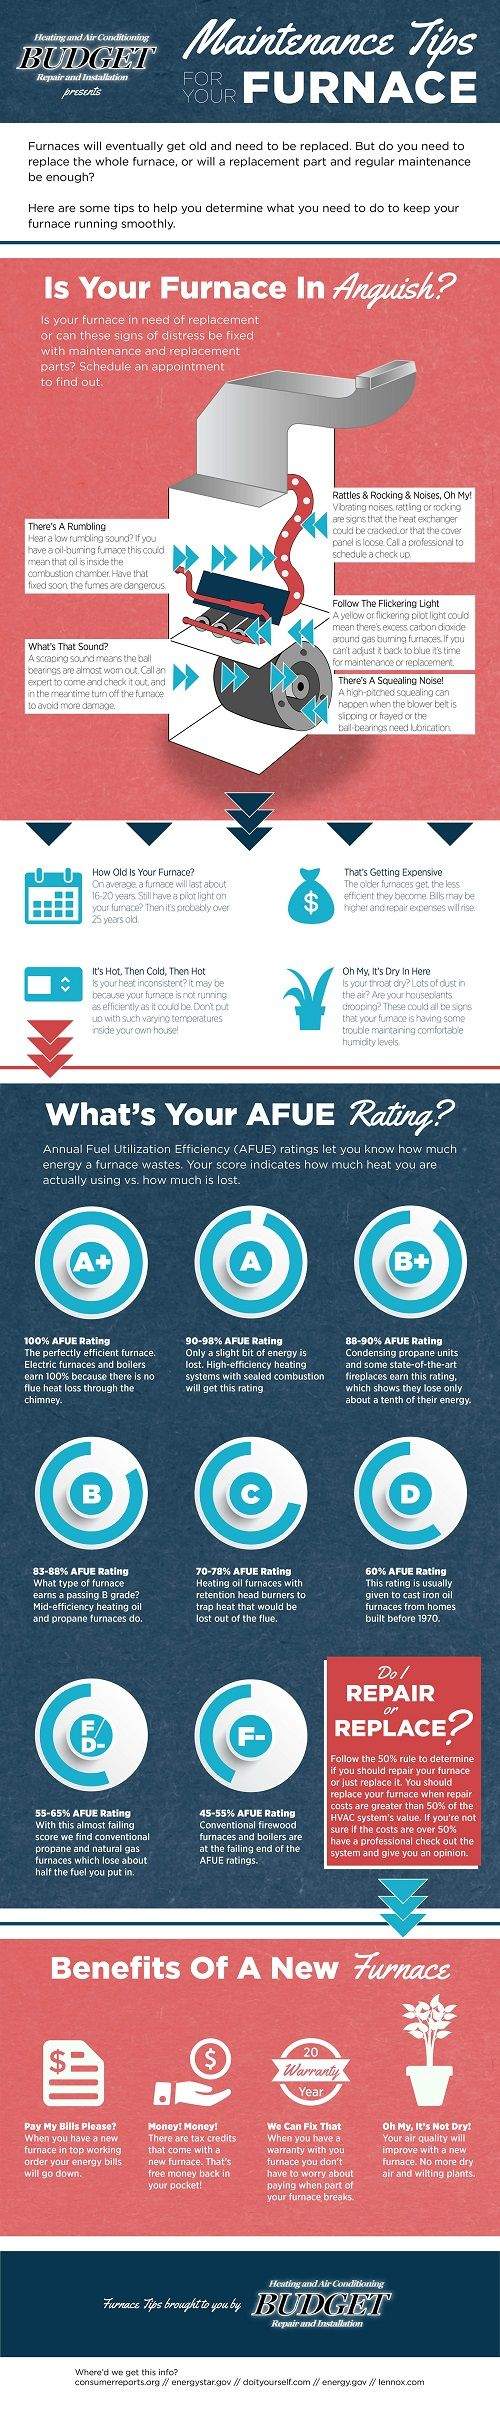 Is your furnace in anguish? What's your AFUE rating? Benefits of a new furnace.